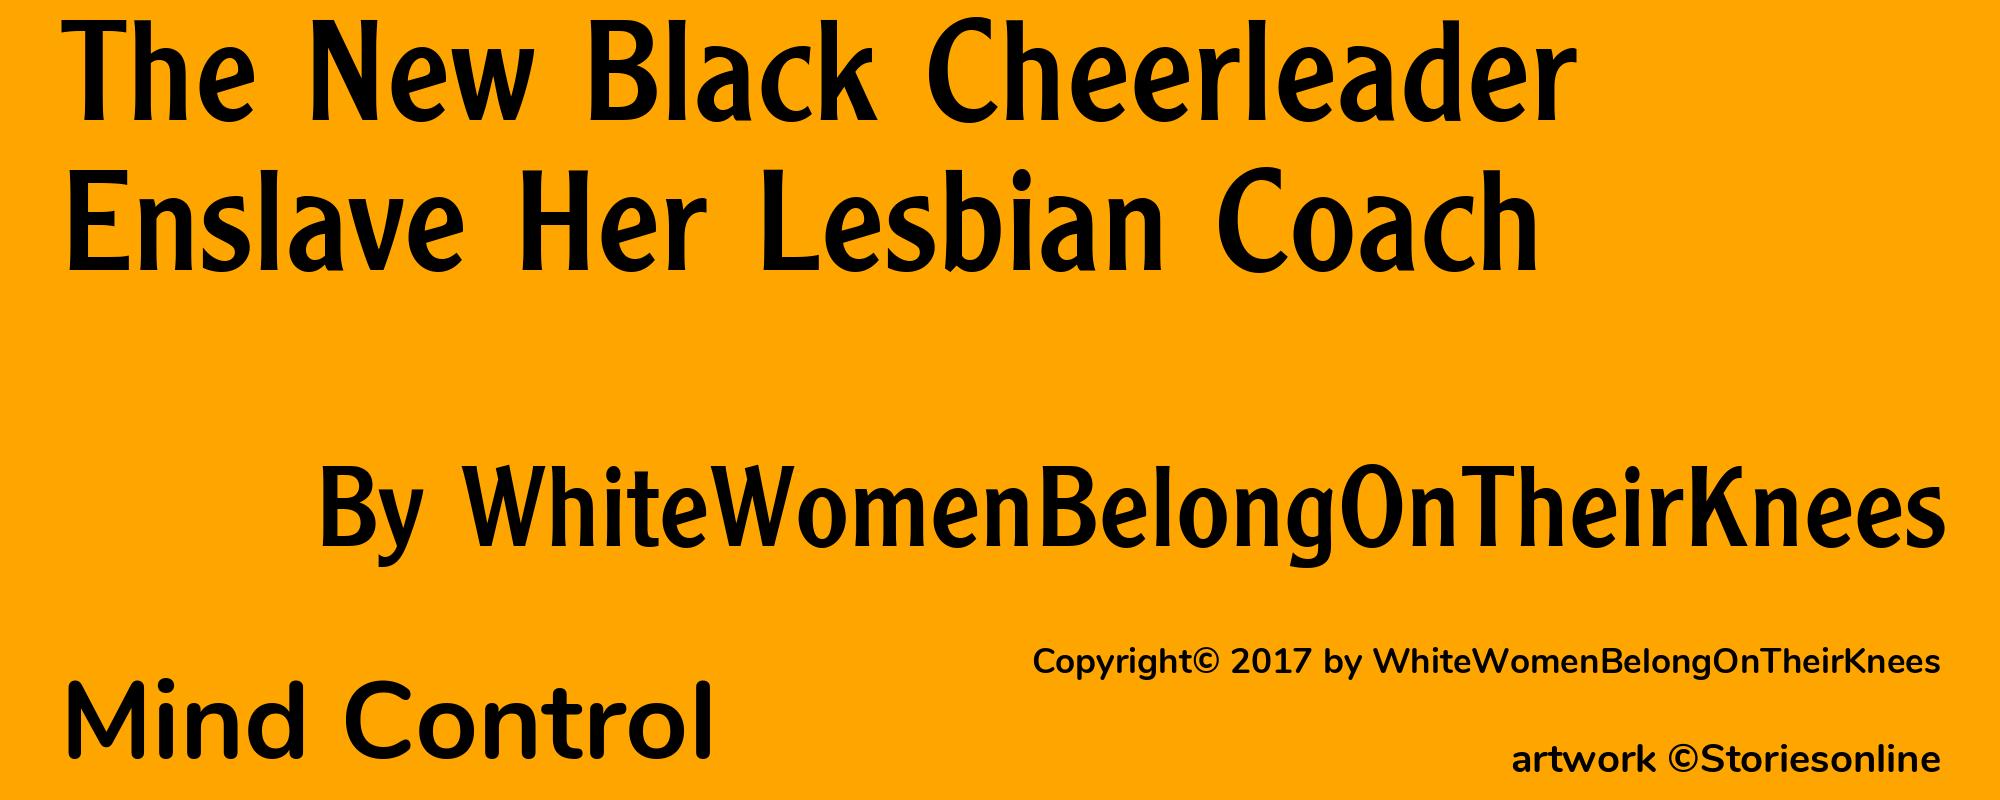 The New Black Cheerleader Enslave Her Lesbian Coach - Cover